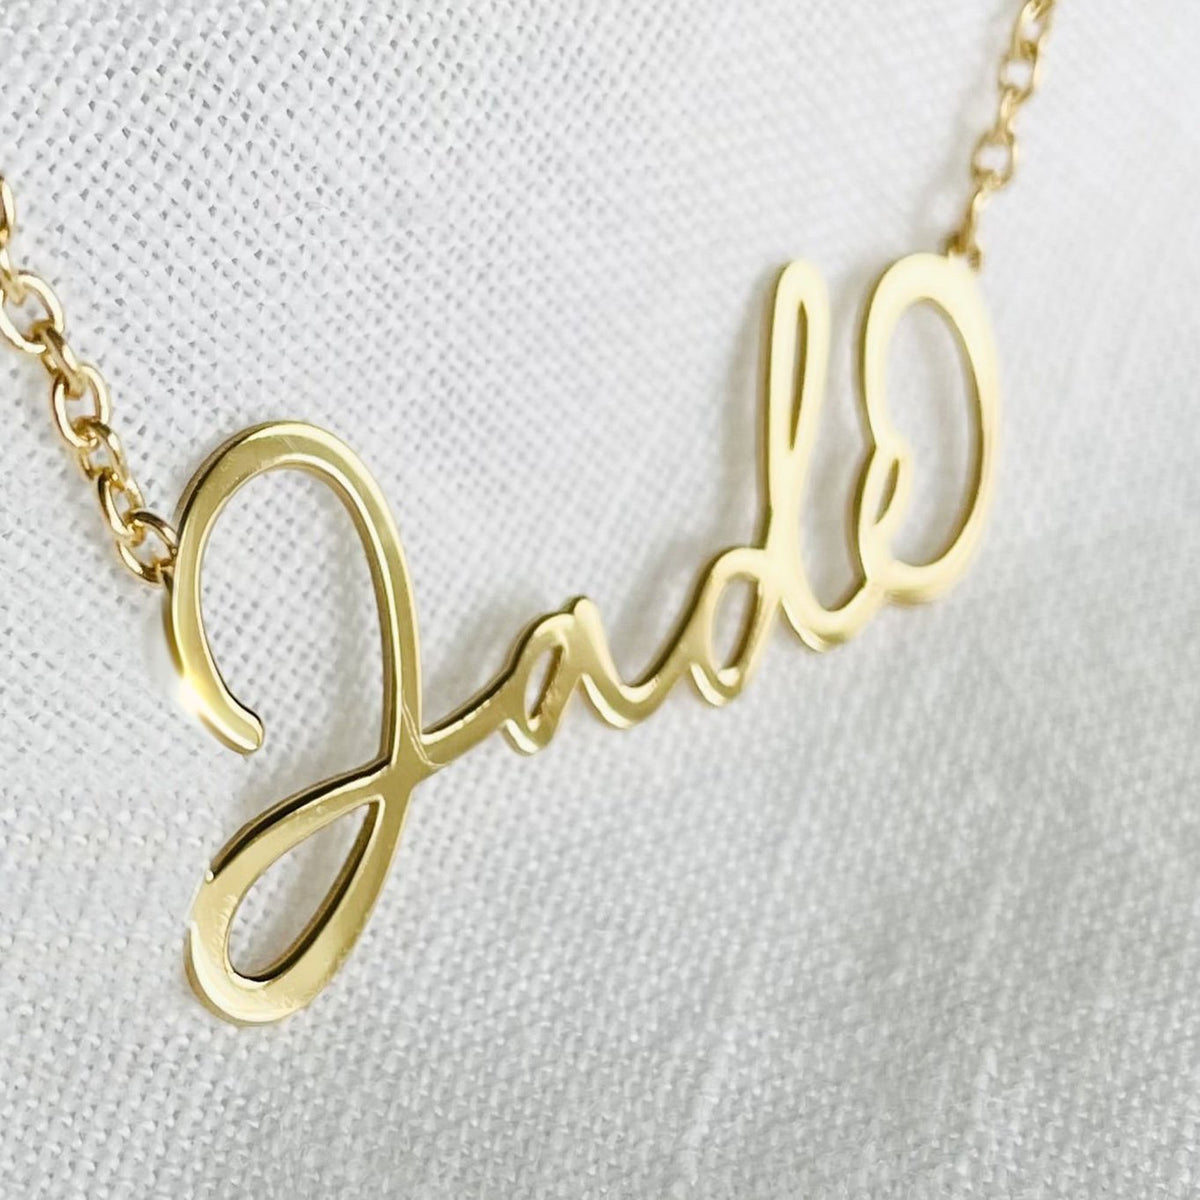 Bijou Script Personalized Name Necklace- Available in 14k, 10k & Sterling Silver